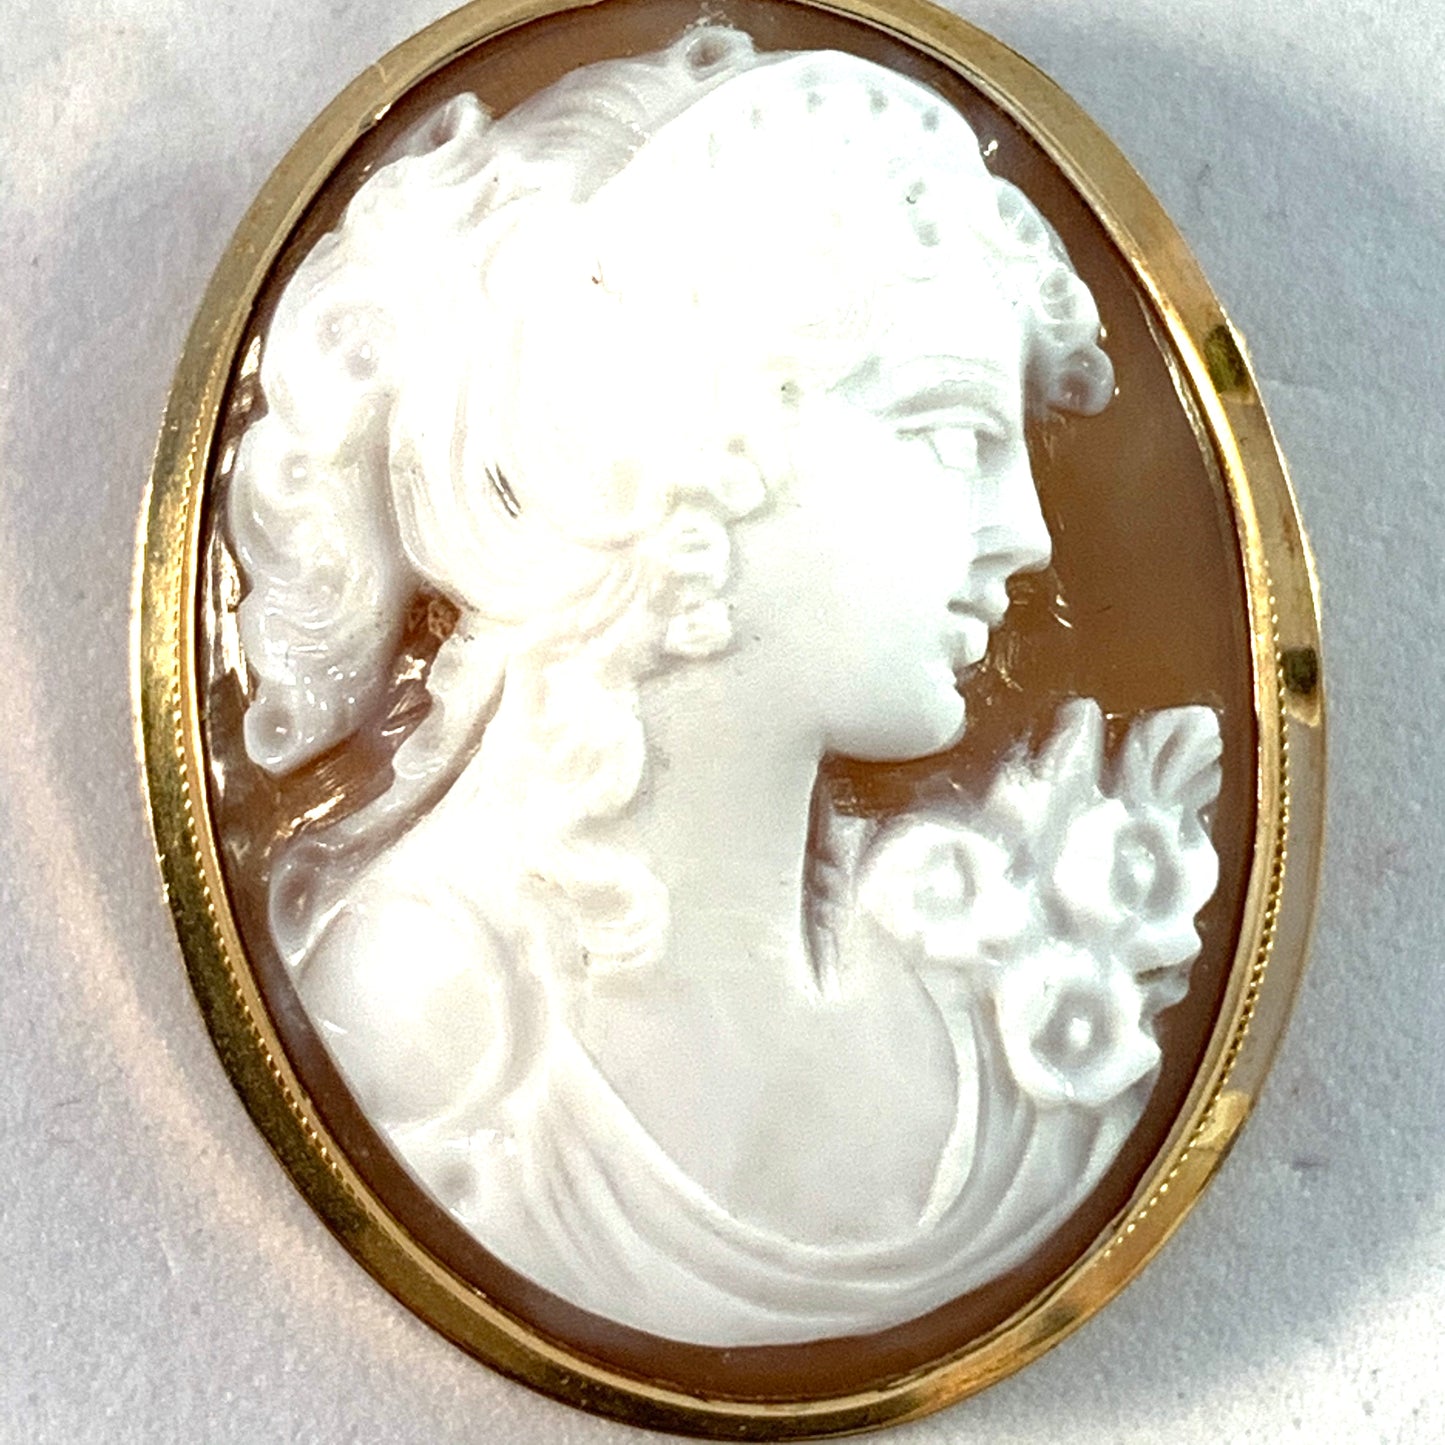 Naples, Italy Vintage 18k Gold Cameo Brooch Pendant.